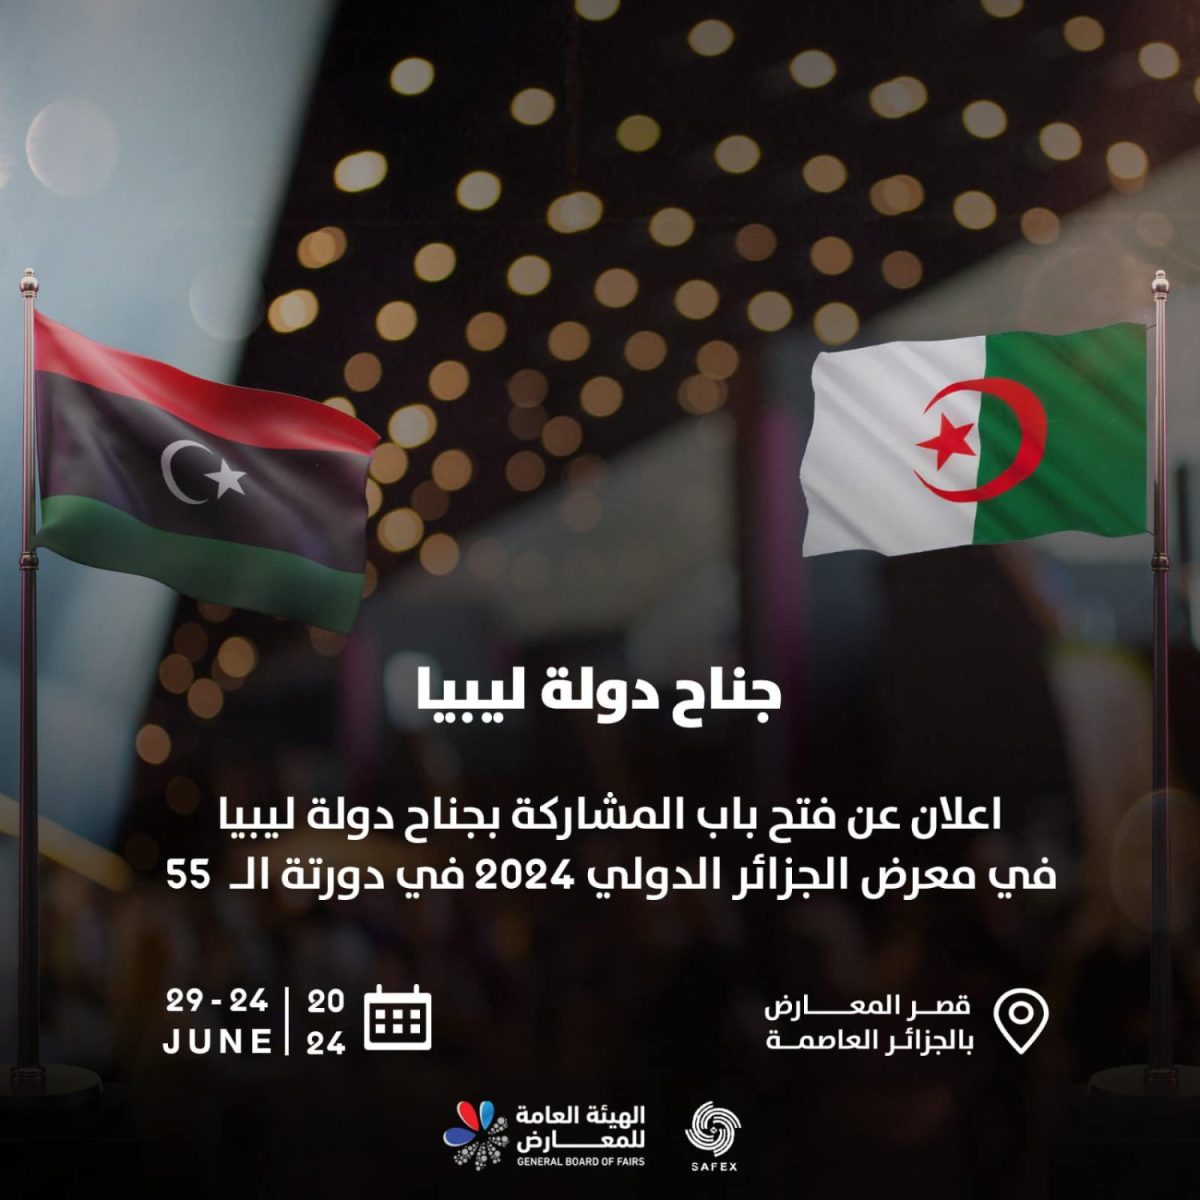 Libya will be participating with a national pavilion at the Algeria International Fair from 24 to 29 June 2024